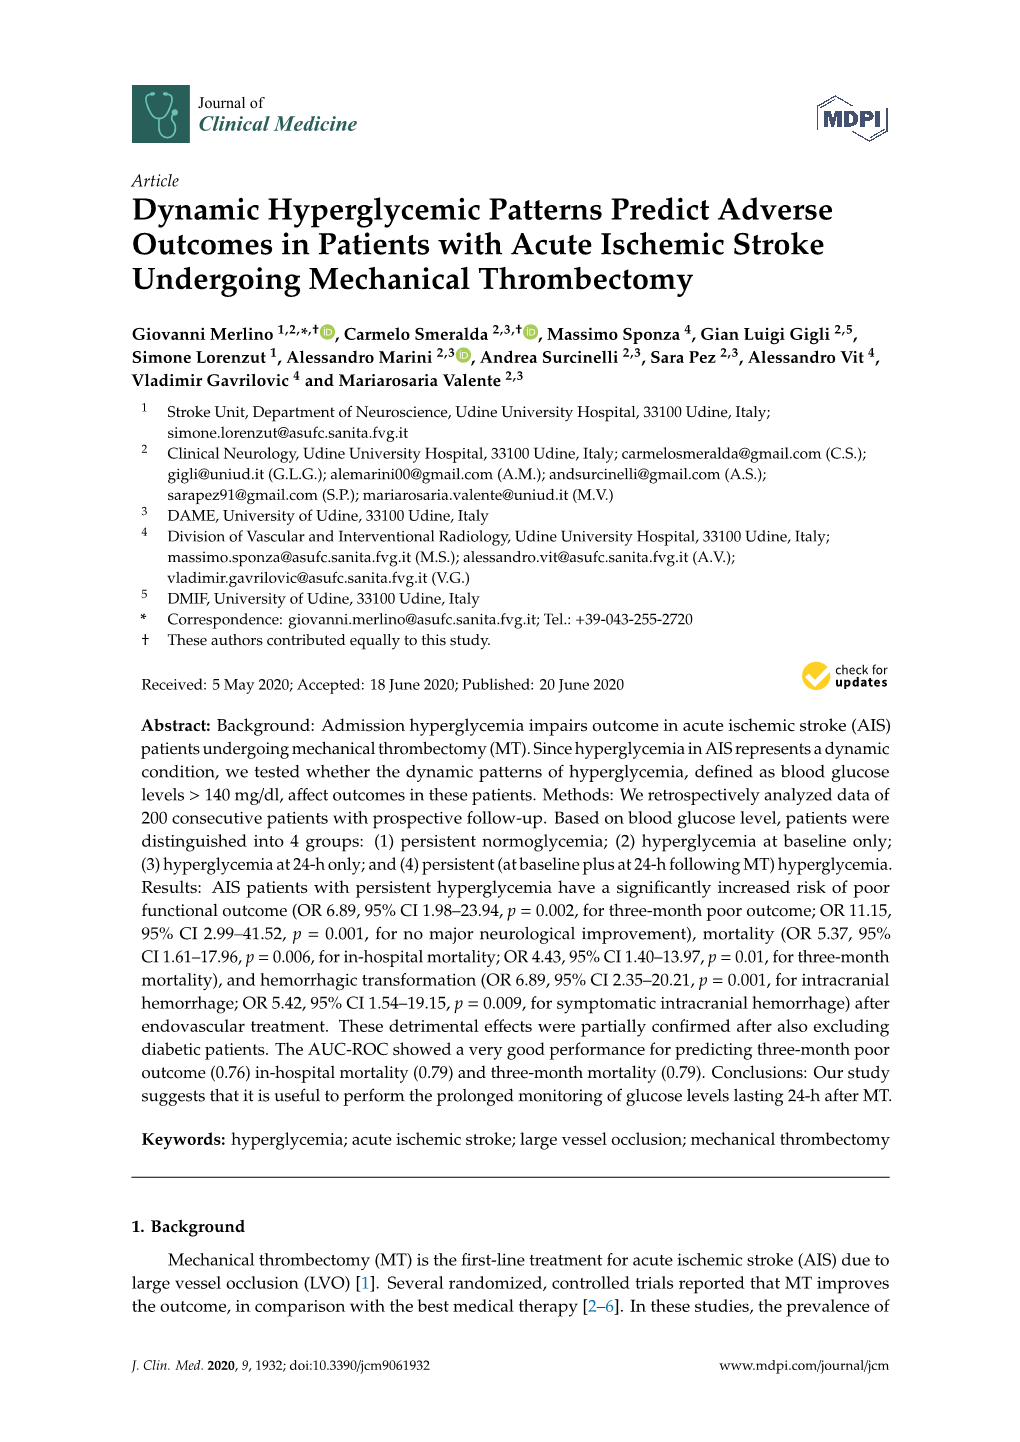 Dynamic Hyperglycemic Patterns Predict Adverse Outcomes in Patients with Acute Ischemic Stroke Undergoing Mechanical Thrombectomy